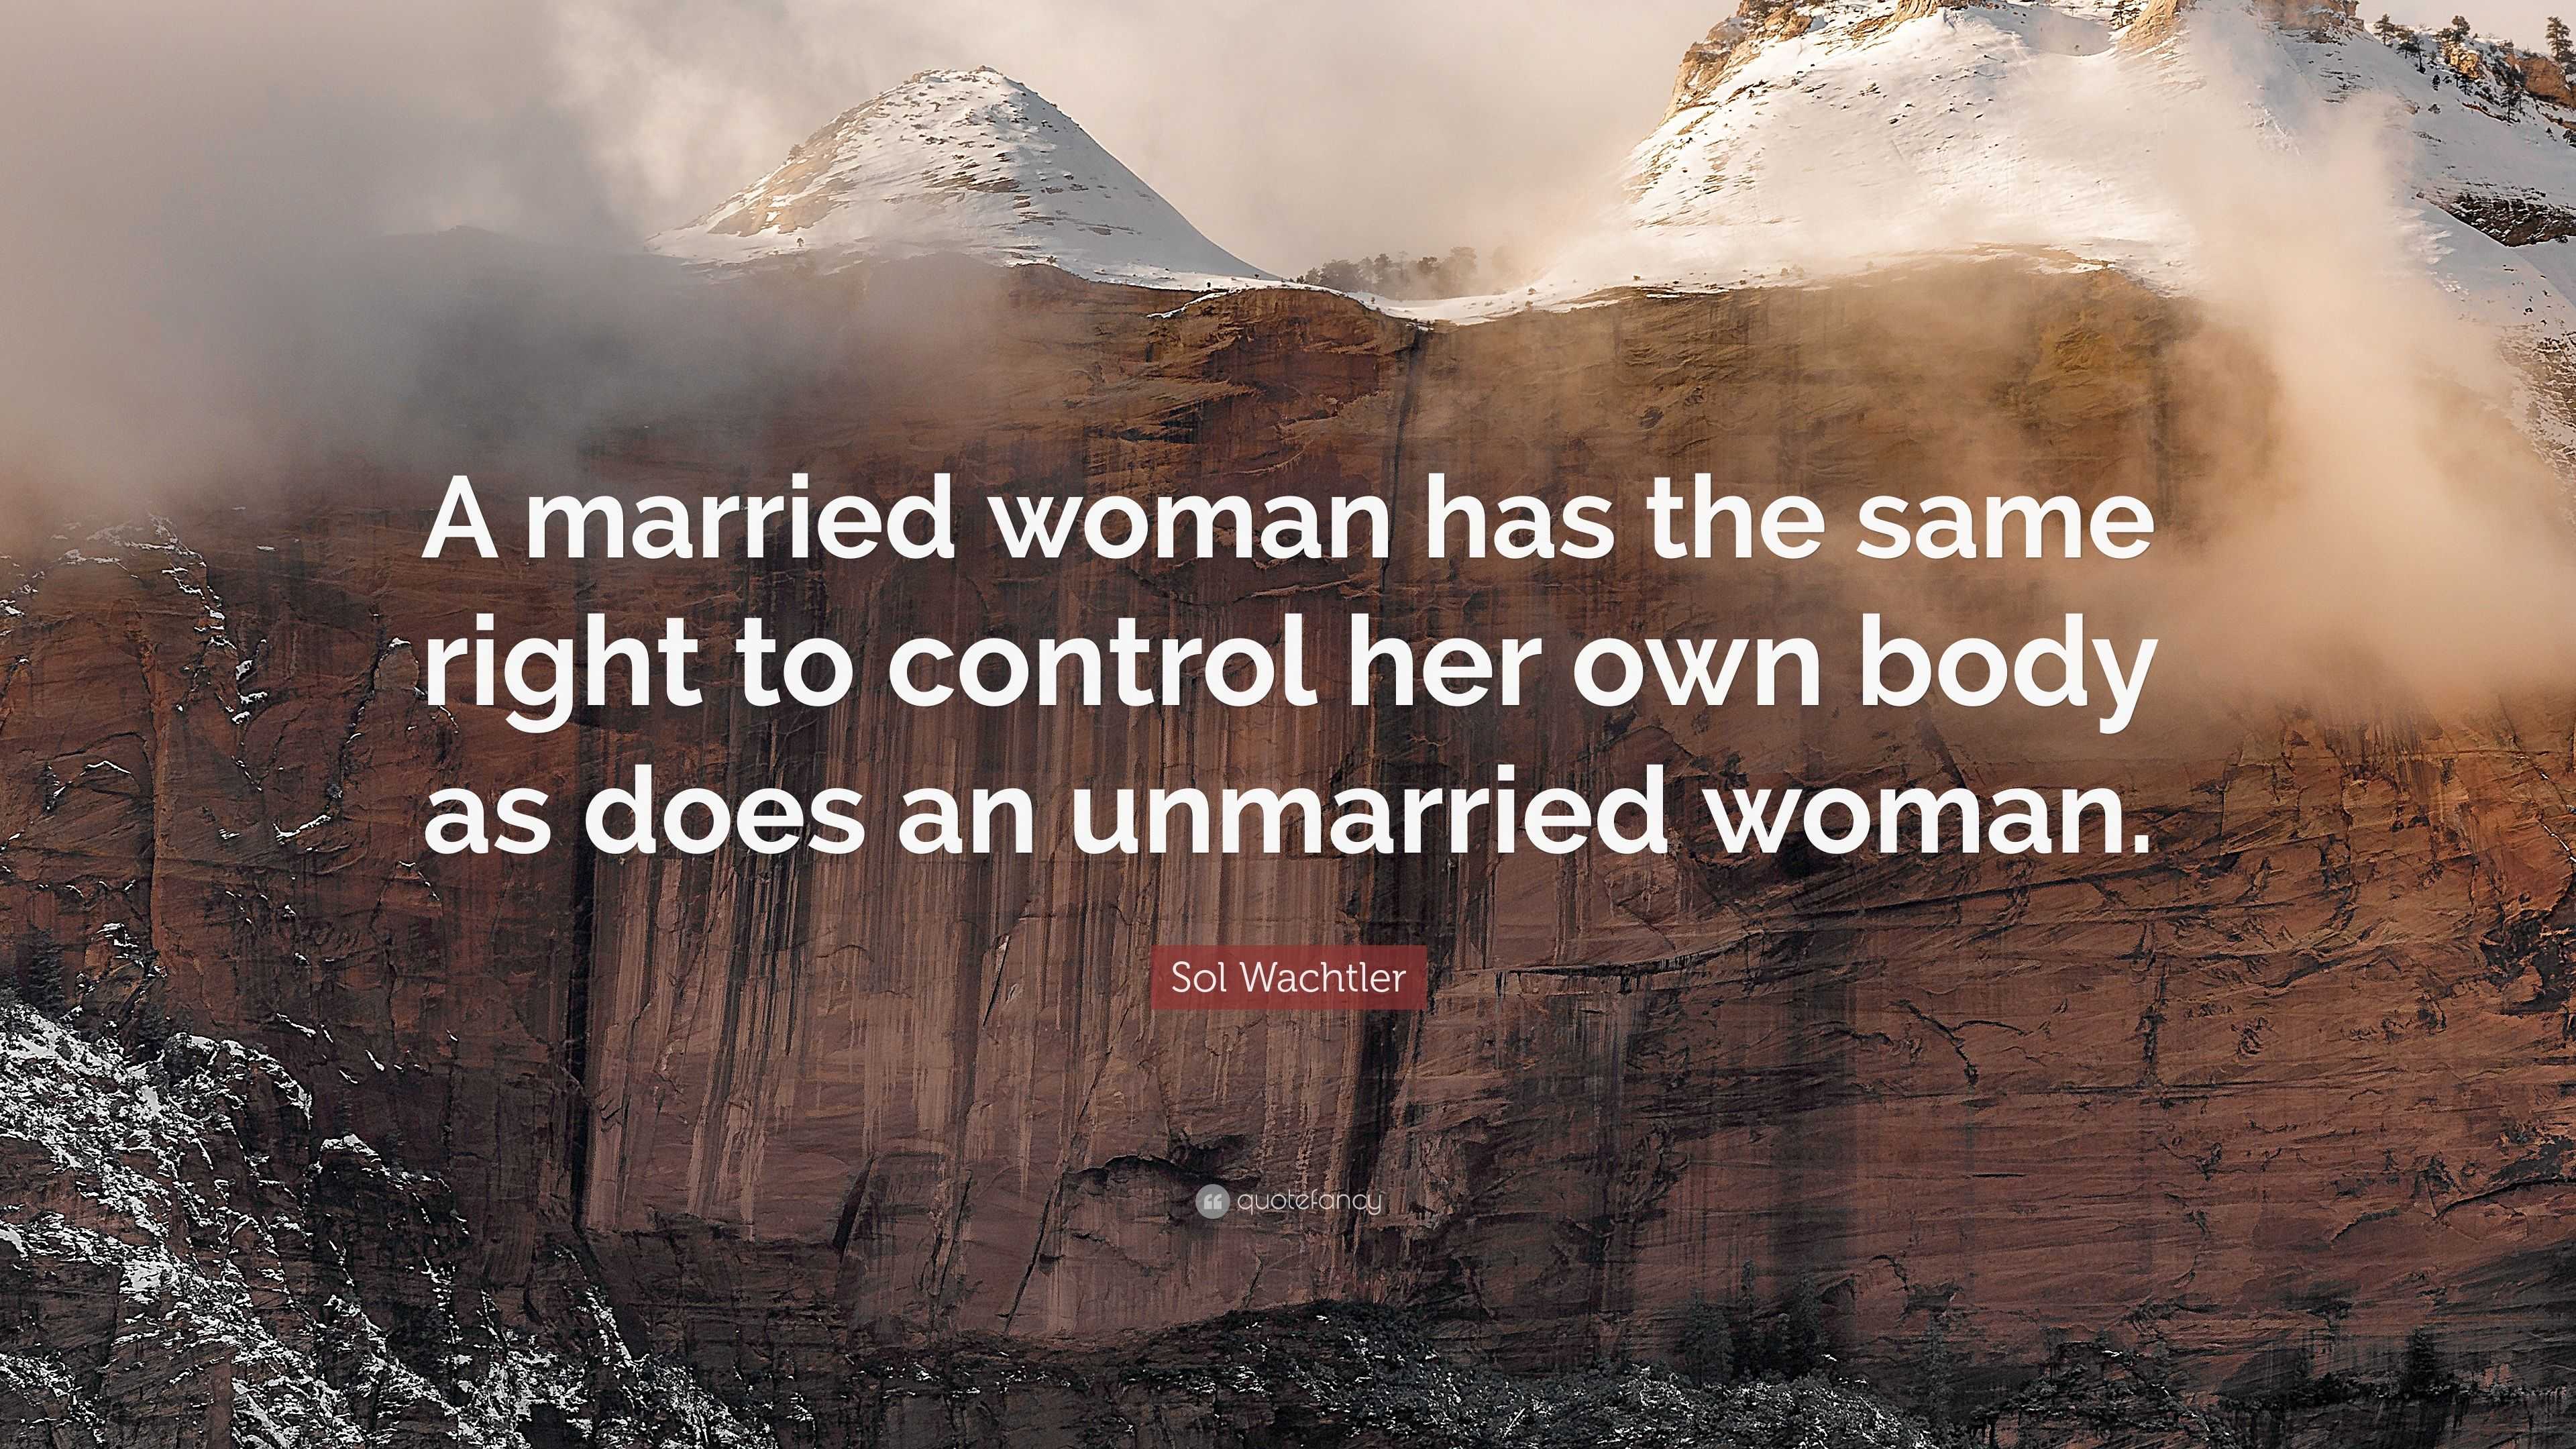 Sol Wachtler Quote: “A married woman has the same right to control her ...